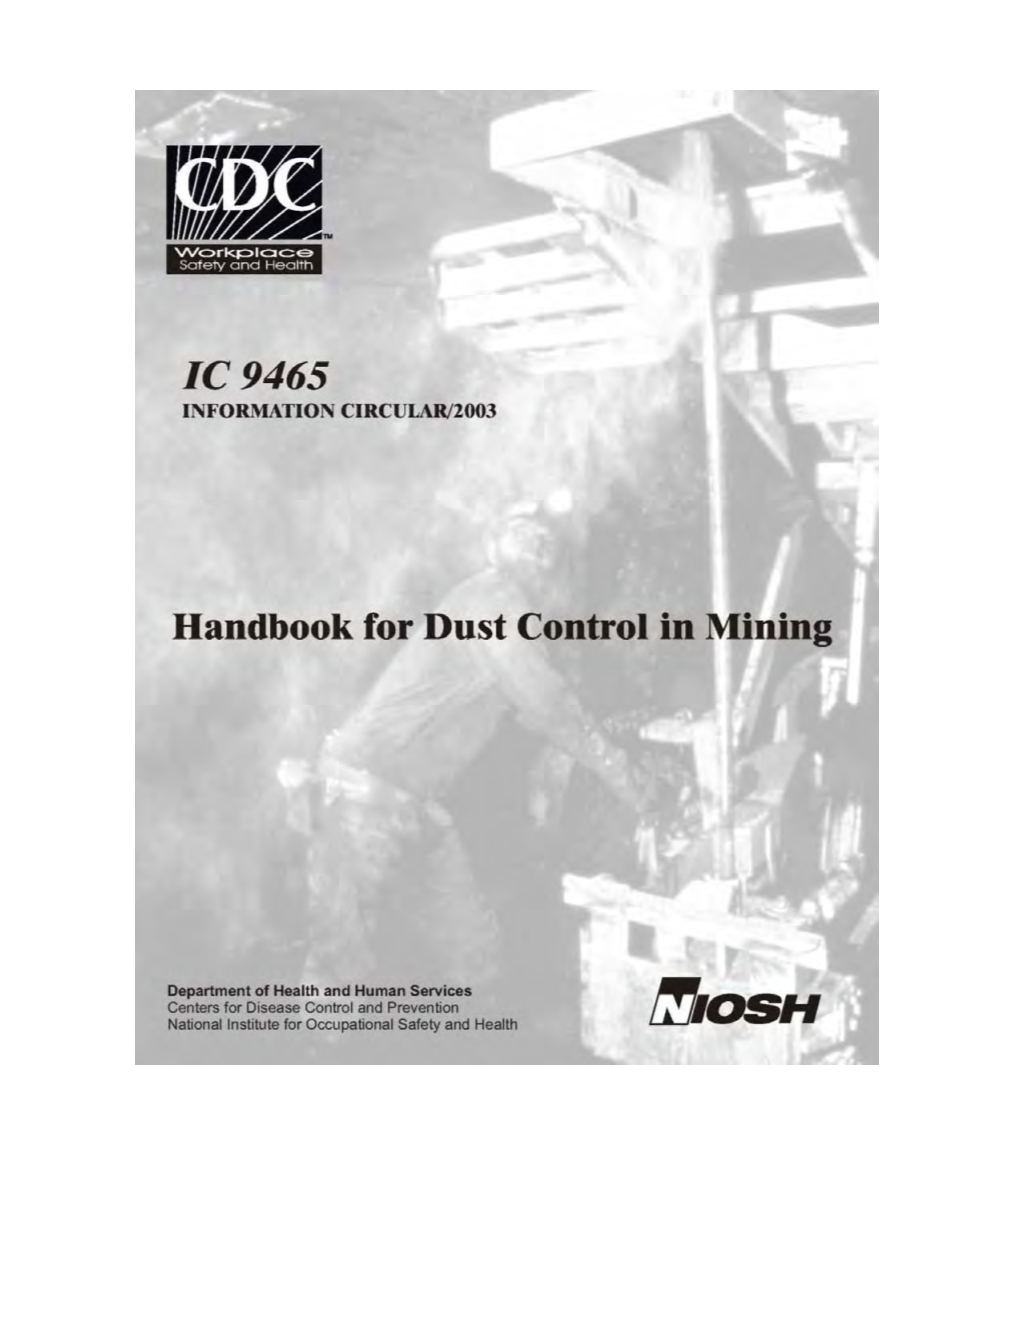 Handbook for Dust Control in Mining